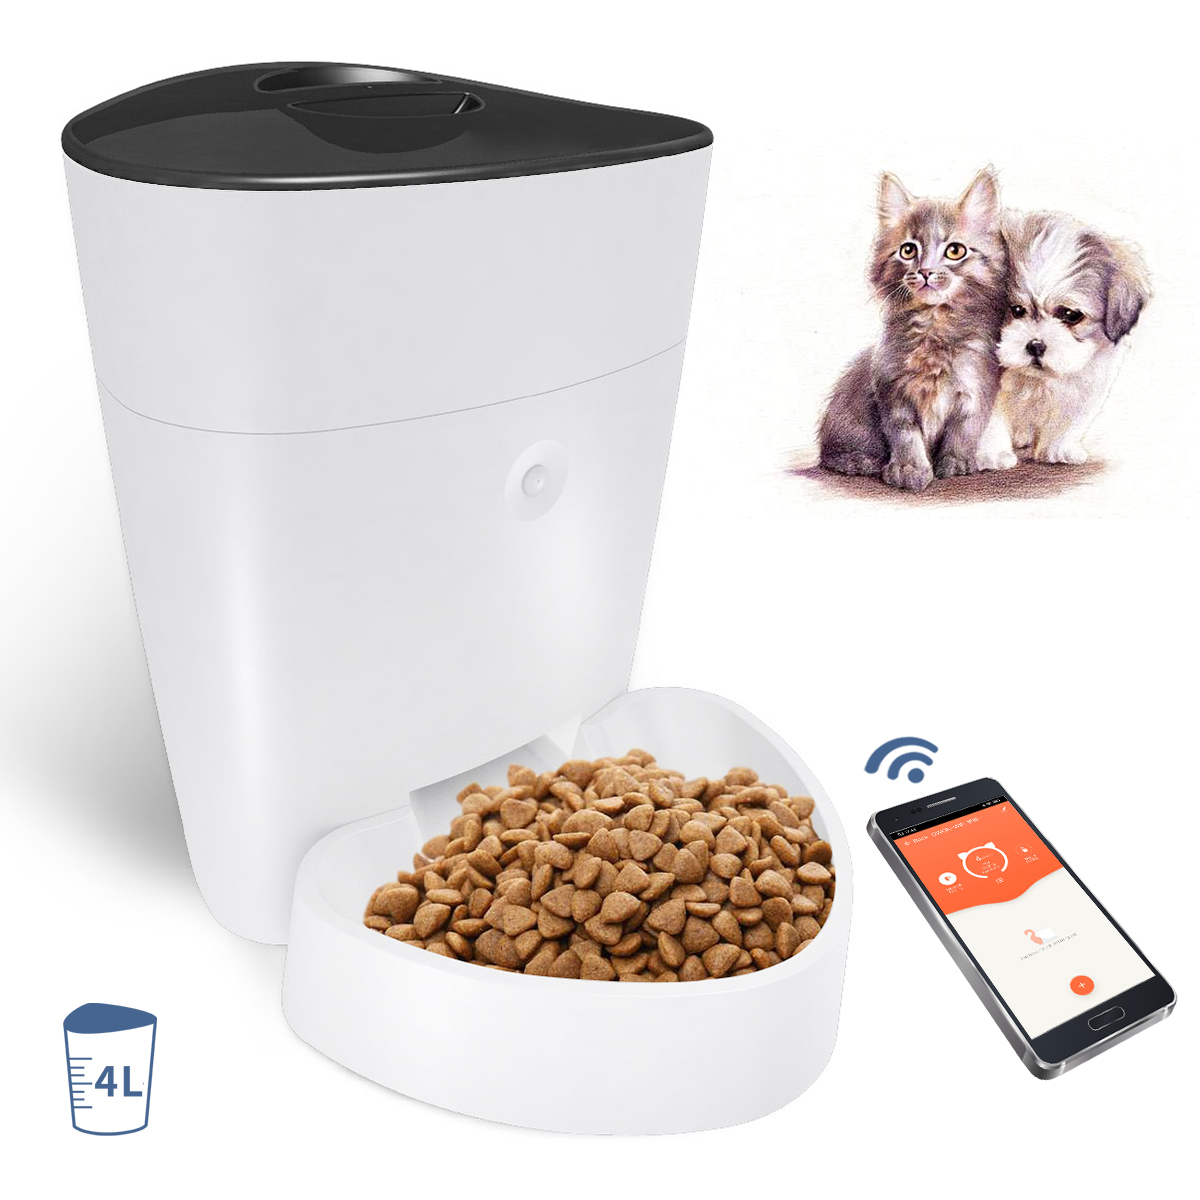 Low price for Pet Food Feeder - Smart Pet Feeder-WiFi/BLE Version 1010-WB-TY – Owon